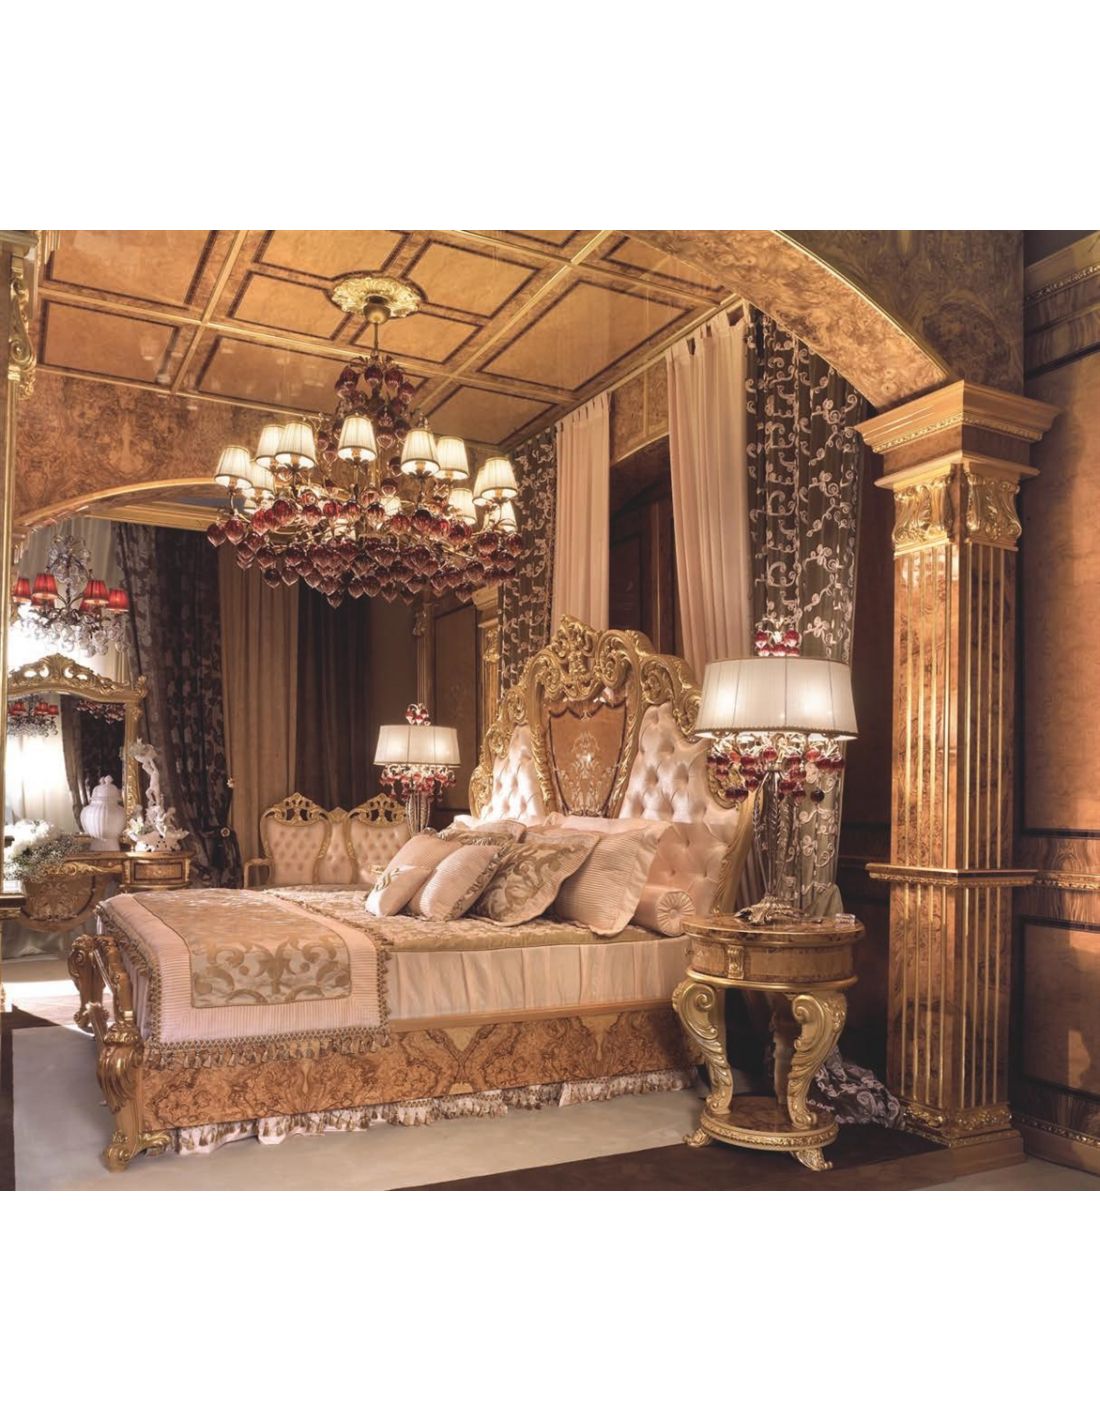 https://bernadettelivingston.com/1051-thickbox_default/stunning-master-bedroom-from-our-modern-day-palace-collection.jpg